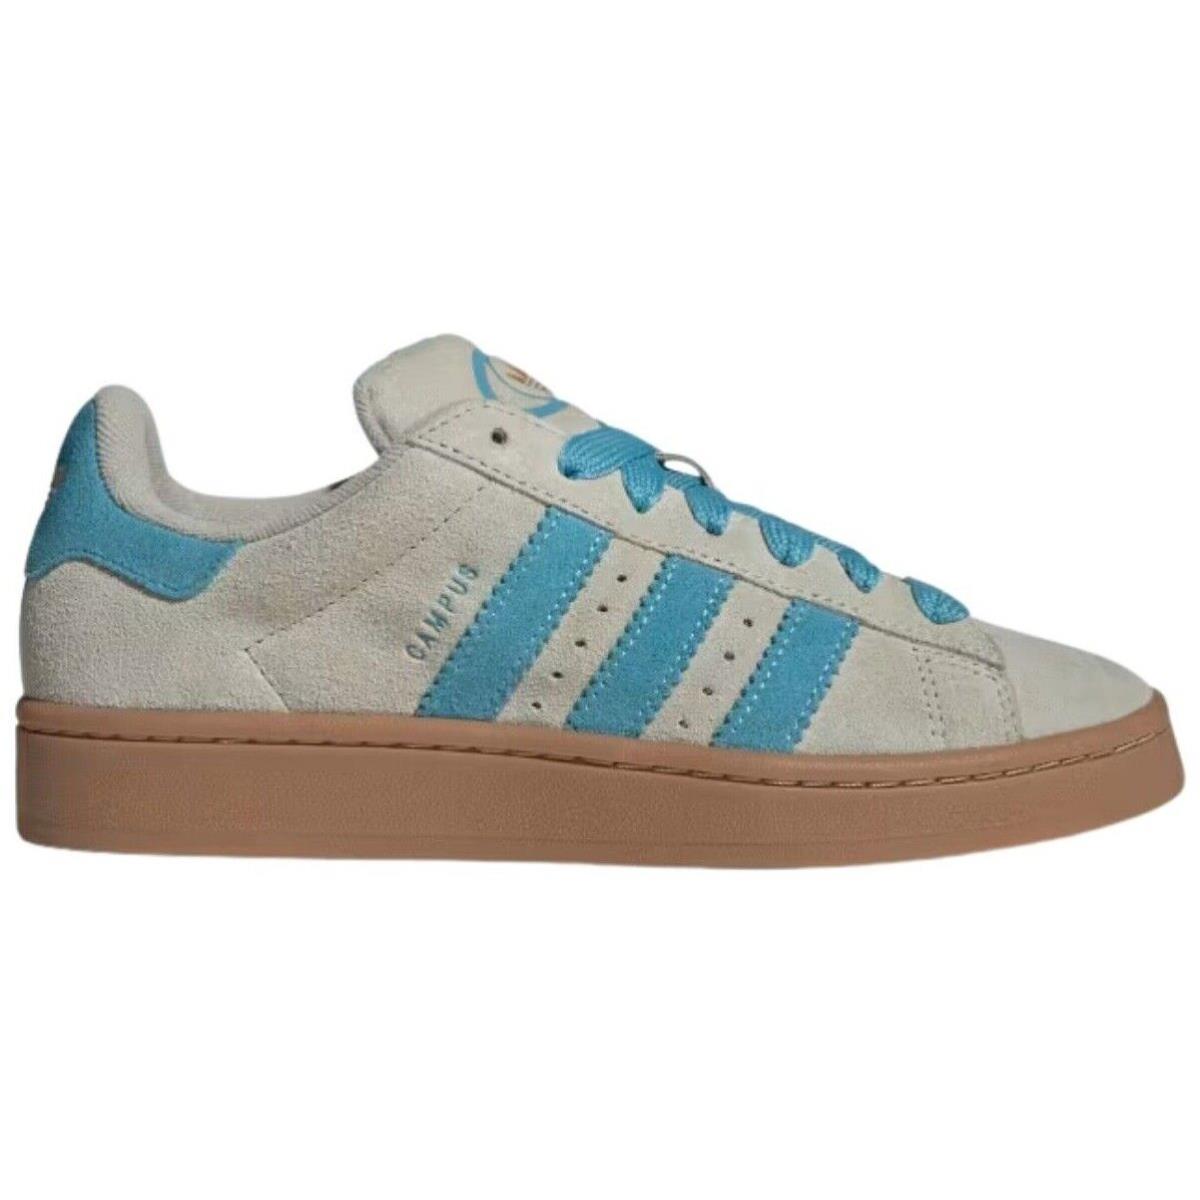 Adidas Originals Campus 00S Women`s Casual Shoes All Colors US Szs 5-11 Putty Grey / Preloved Blue / Gold Metallic